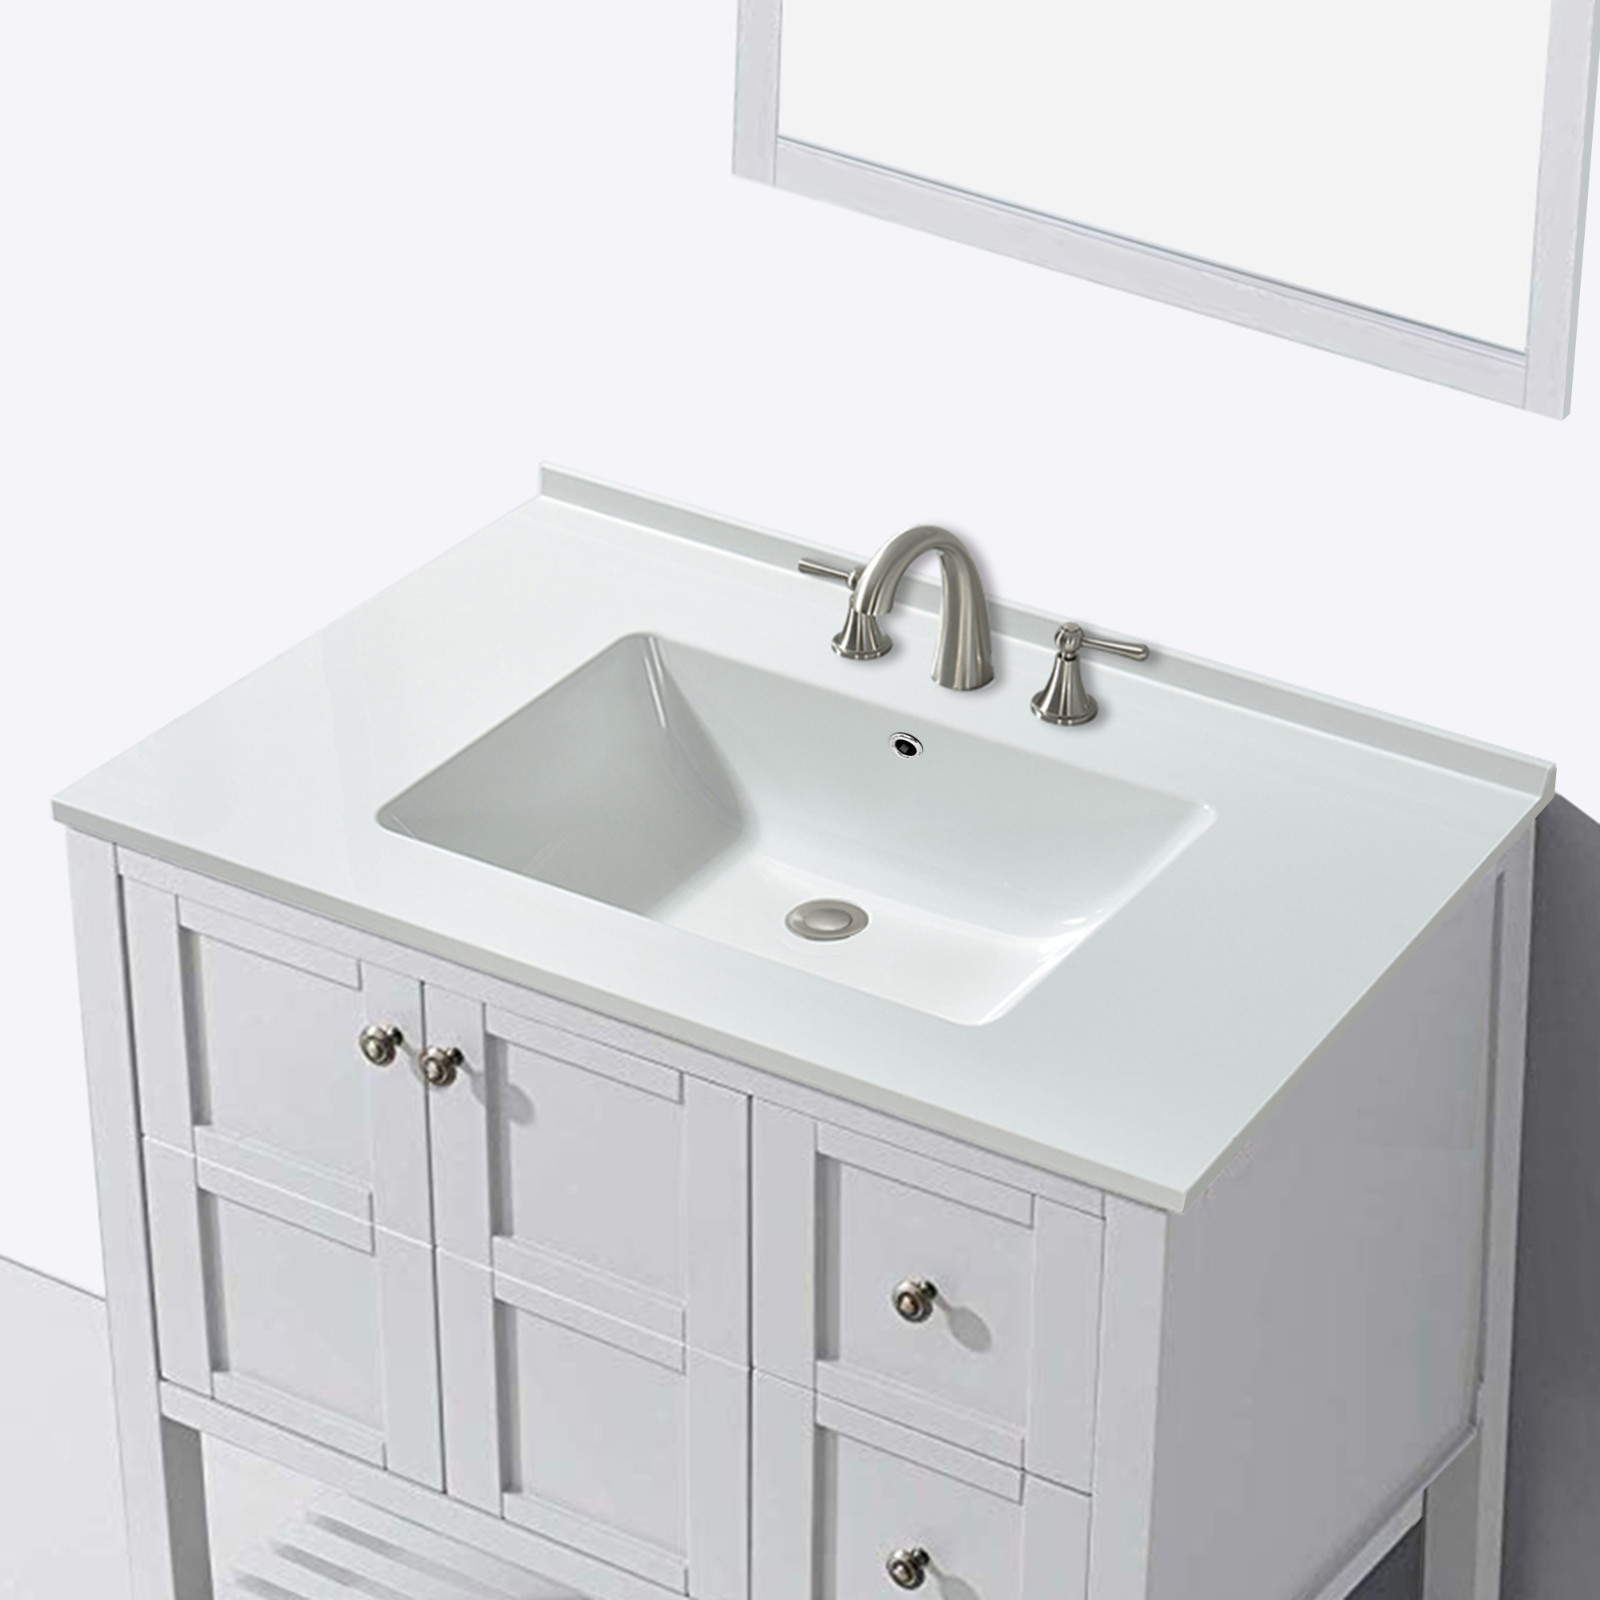  WOODBRIDGE VT3722-1000 Solid Surface Vanity Top with with Intergrated Sink and 3 Faucet Holes for 4-Inch Centerset Faucet, 37